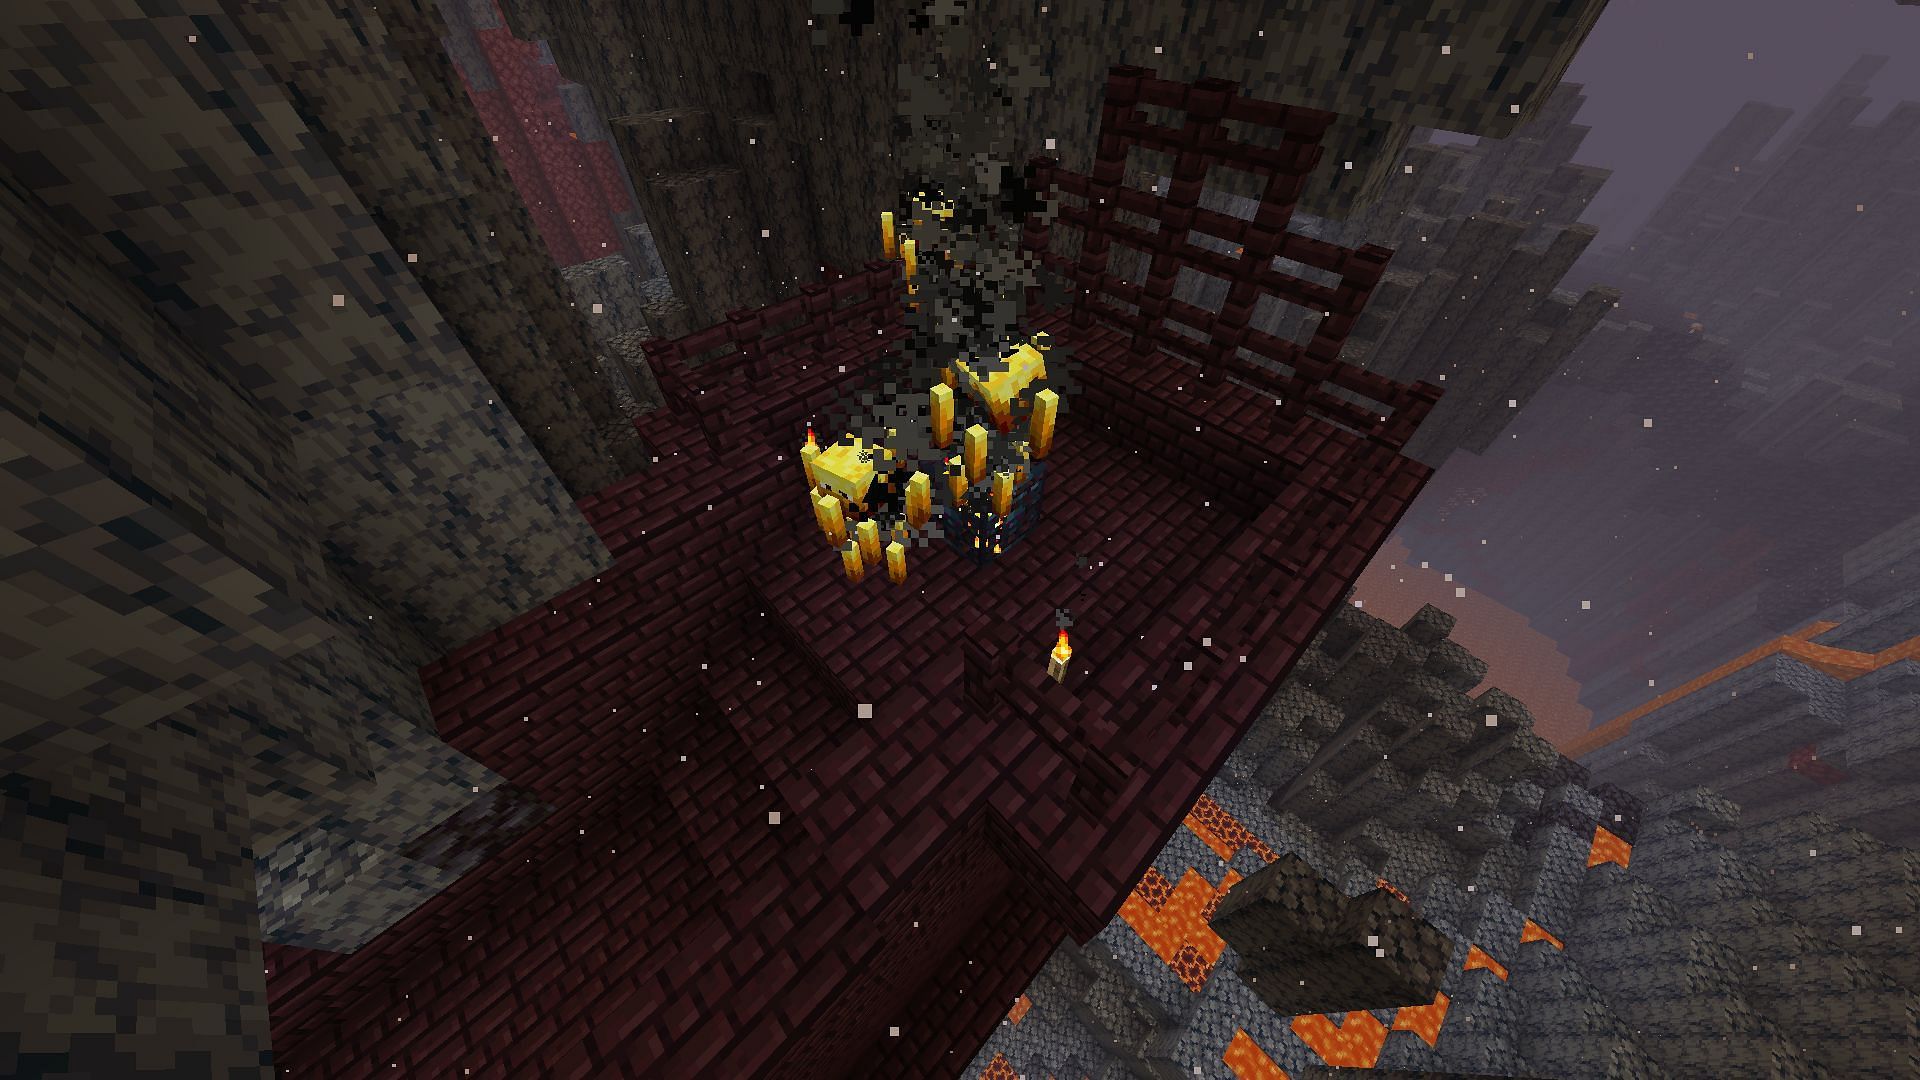 Nether Fortress in Minecraft 1.19 spawn Blazes and Wither Skeletons (Image via Mojang)